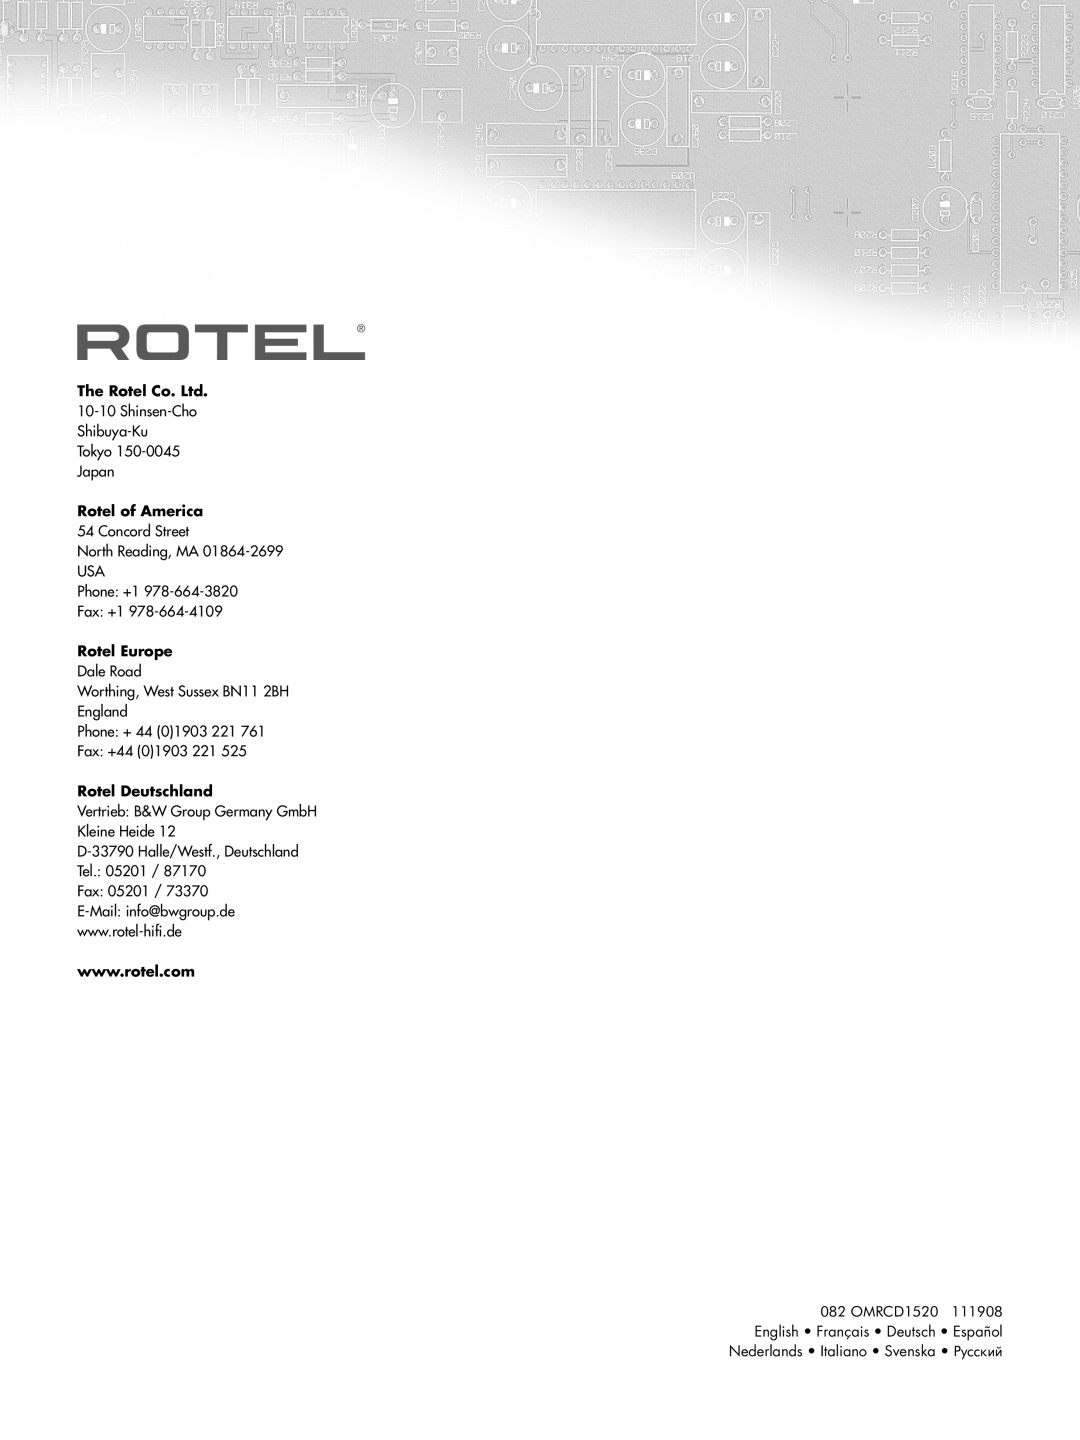 Rotel RCD-1520 owner manual The Rotel Co. Ltd, Rotel of America, Rotel Europe, Rotel Deutschland 